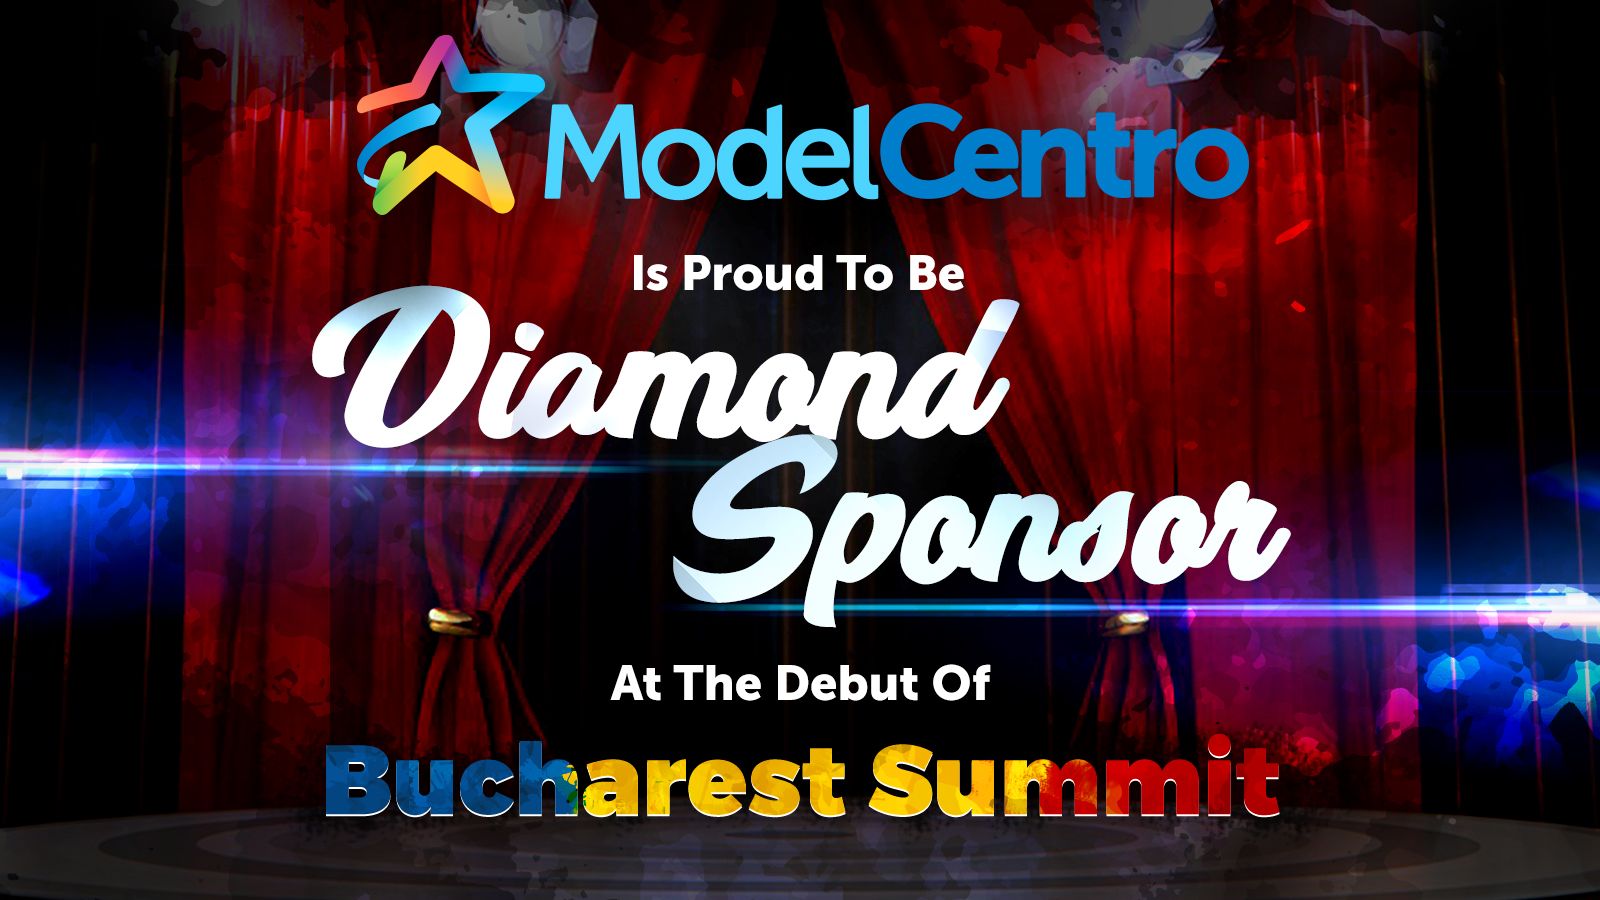 ModelCentro Signs On As Diamond Sponsor Of First Ever Bucharest Summit